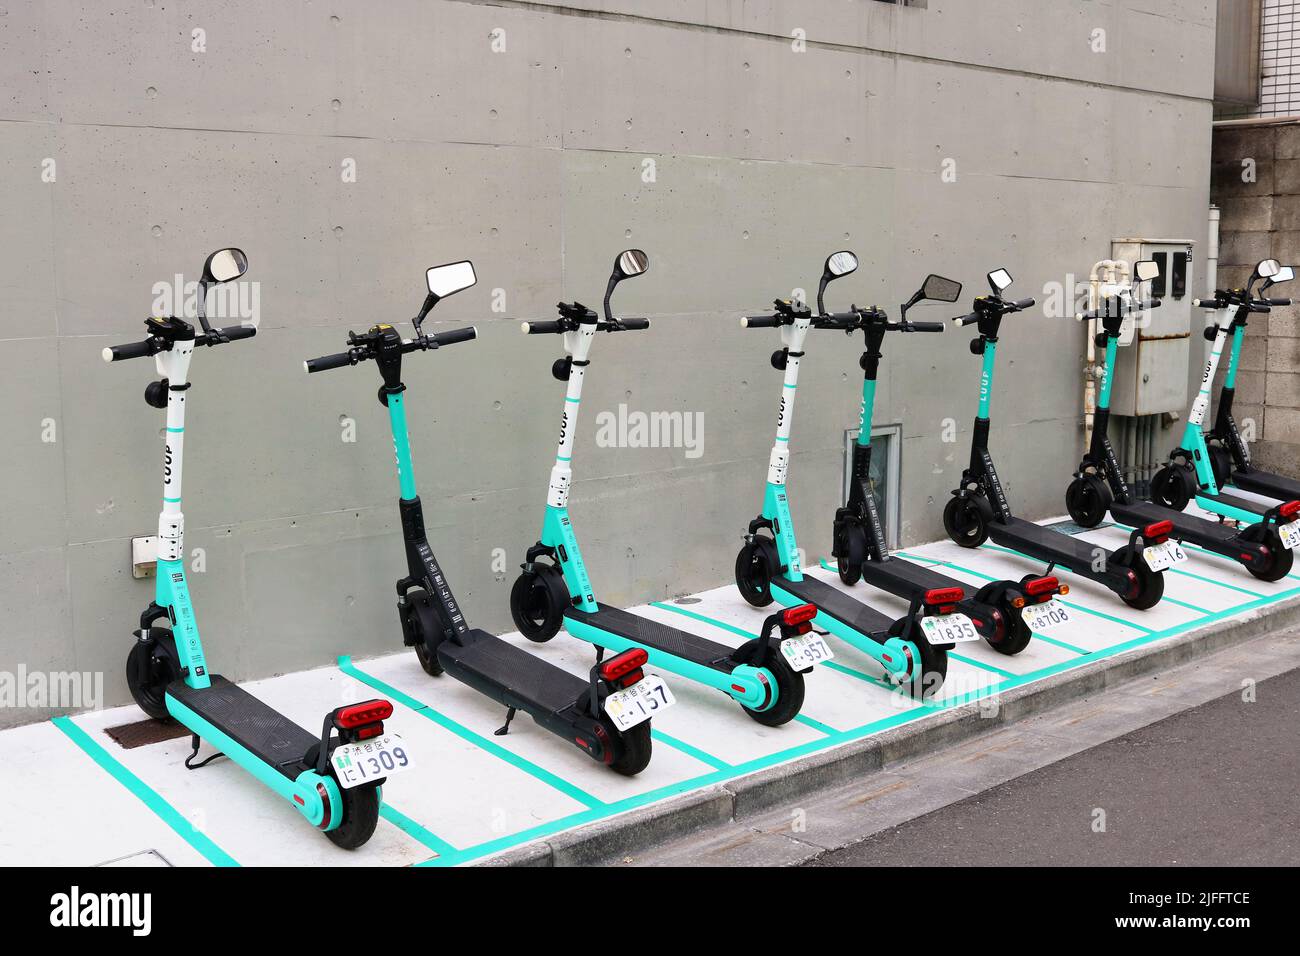 TOKYO, JAPAN - March 24th, 2022: Row of Luup rental e-scooters parked in  Tokyo's Aoyama area in Shibuya Ward Stock Photo - Alamy